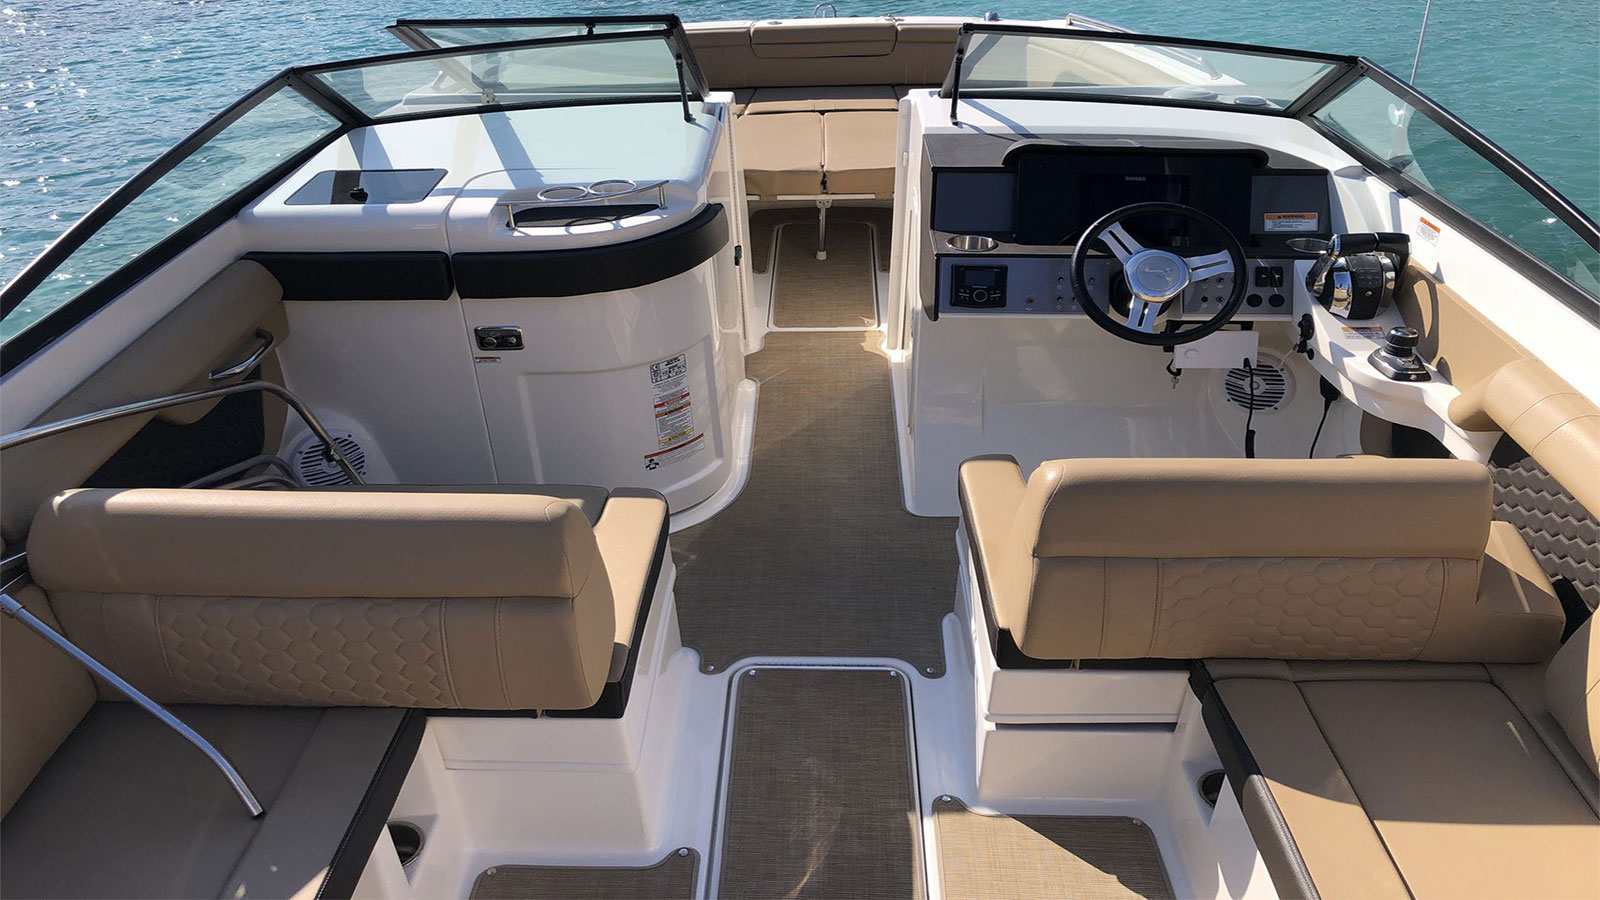 2018 Sea Ray SDX 290, Used Sea Ray SDX 290 Yacht For Sale, Motor yacht Sea Ray SDX 290, Sea Ray SDX 290, Sea Ray, Sea Ray SDX 290 for sale, Sea Ray yachts, Sea Ray for sale, Sea Ray SDX 290 yachts, buy Sea Ray SDX 290, 2018 Sea Ray SDX 290 boat, Sea Ray turkey, Sea Ray yacht sales, Sea Ray motoryacht, perfomax, perfomax marine, ete yachting for sale, Sea Ray SDX290, Sea Ray SDX290 Boat, yacht brokerage, yacht sales, turkey broker, turkey brokerage, preowned Sea Ray, secondhand Sea Ray